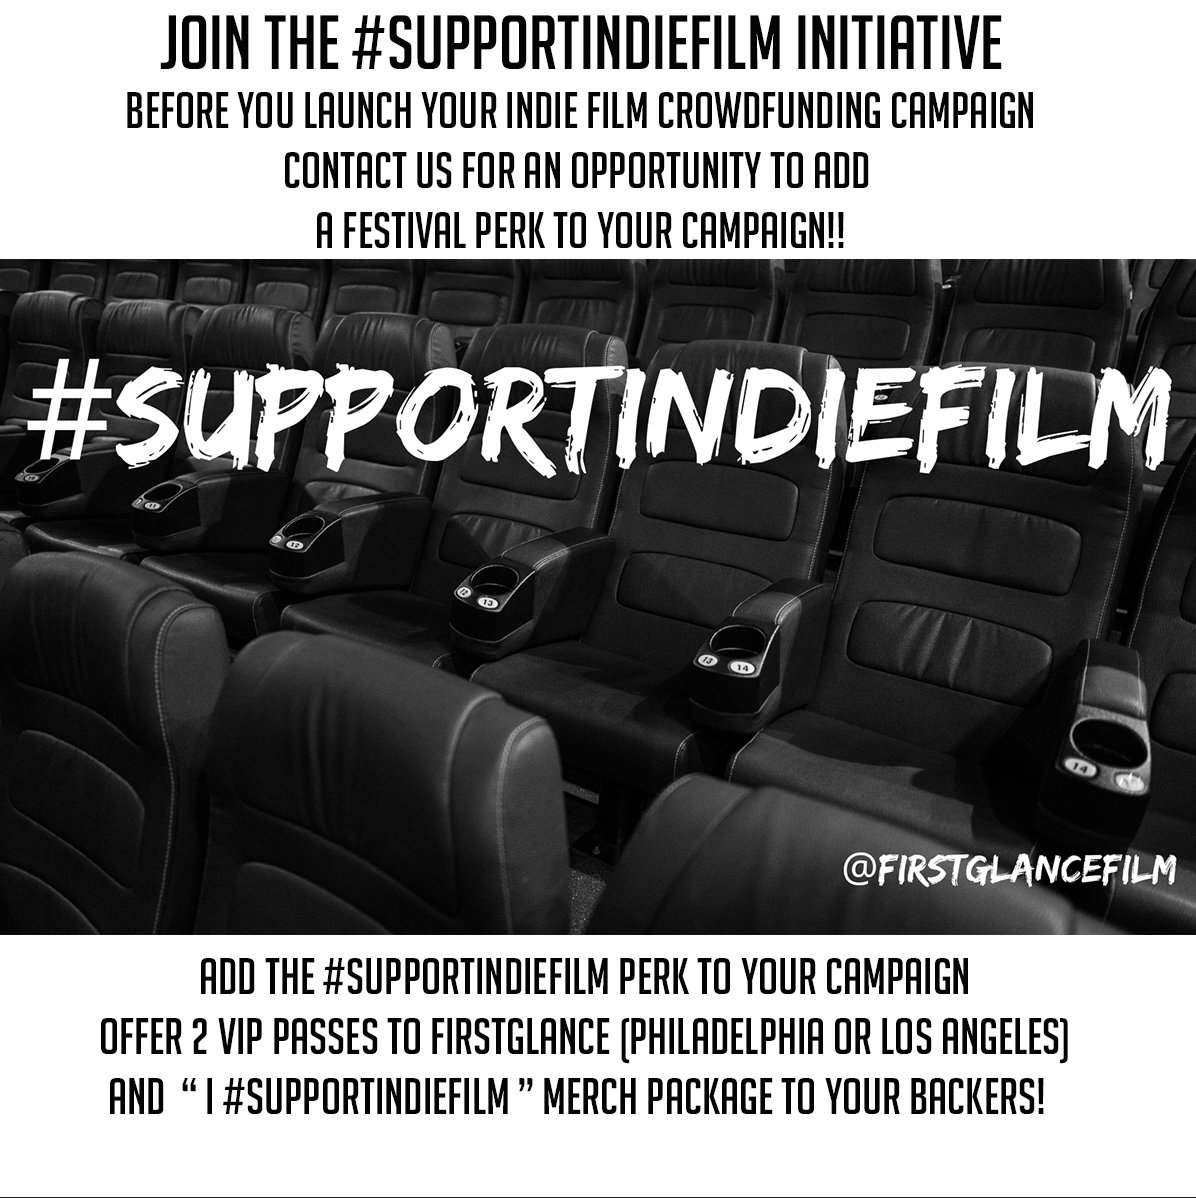 Preparing to launch an #indiefilm crowdfunding campaign?
Looking for unique perks!
DM us for more info!
#SupportIndieFilm Initiative:
Helping filmmakers from the start!